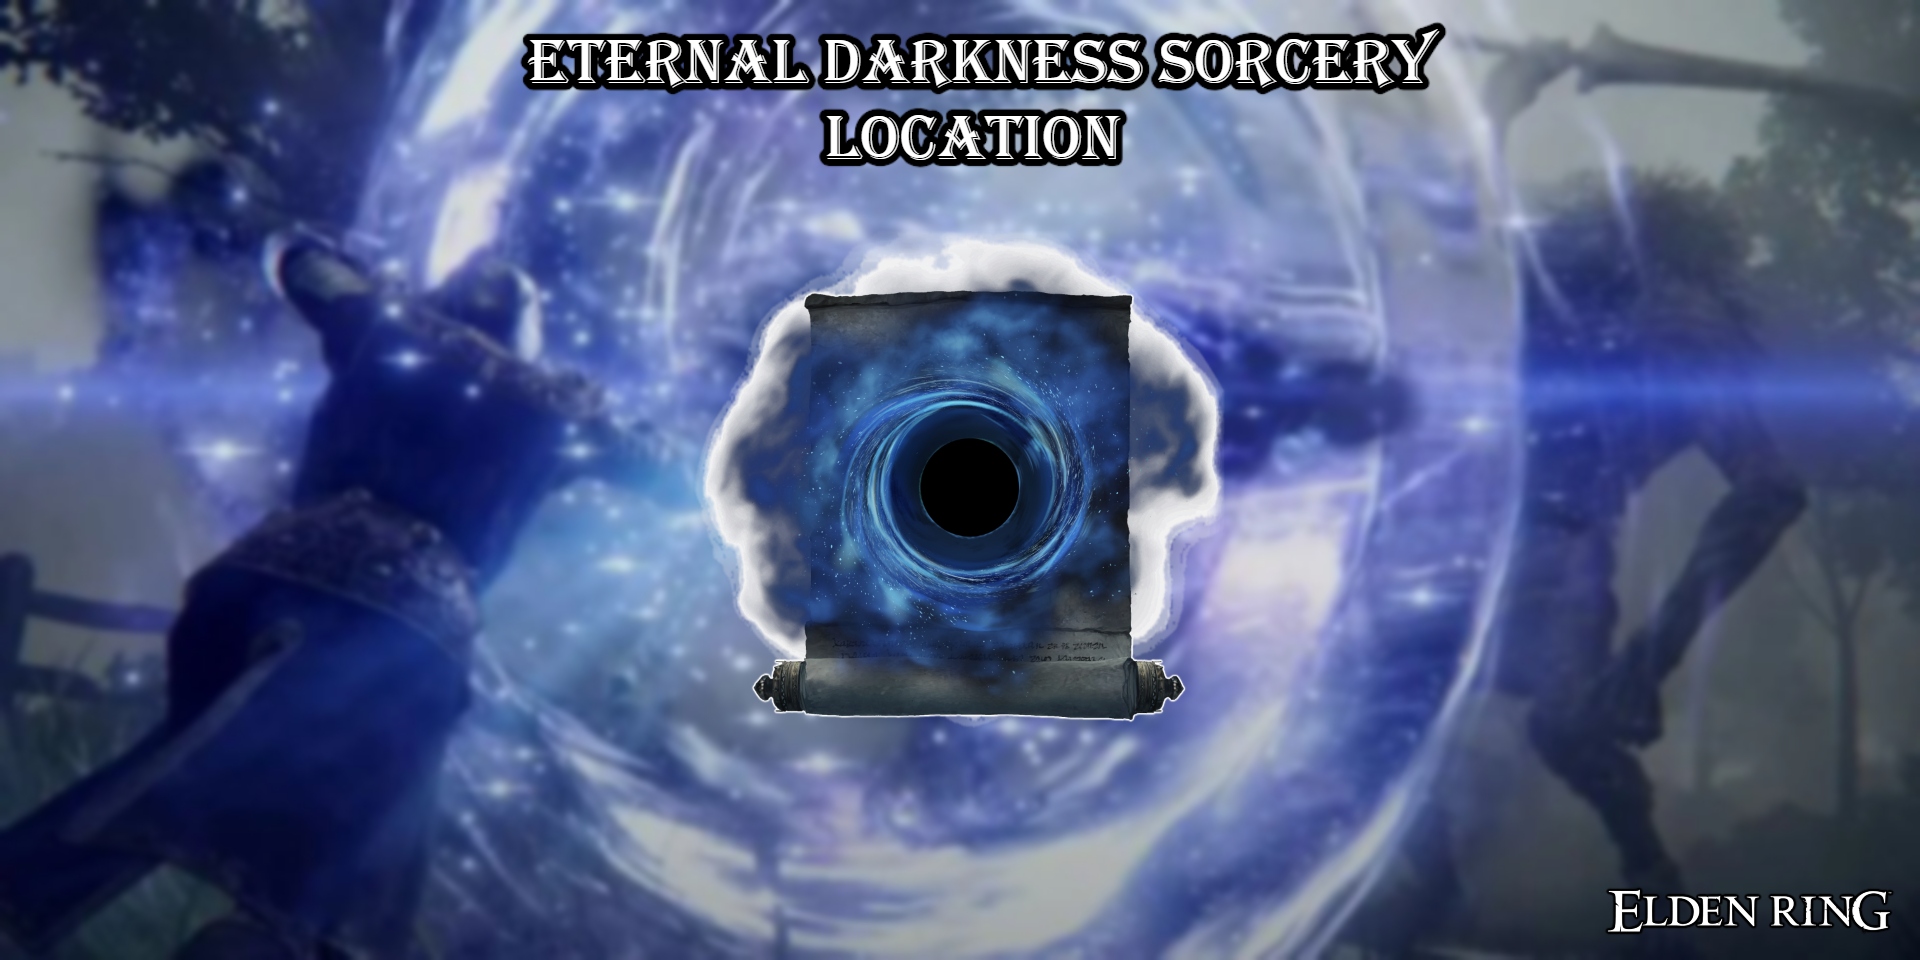 You are currently viewing Eternal Darkness Sorcery Location In Elden Ring